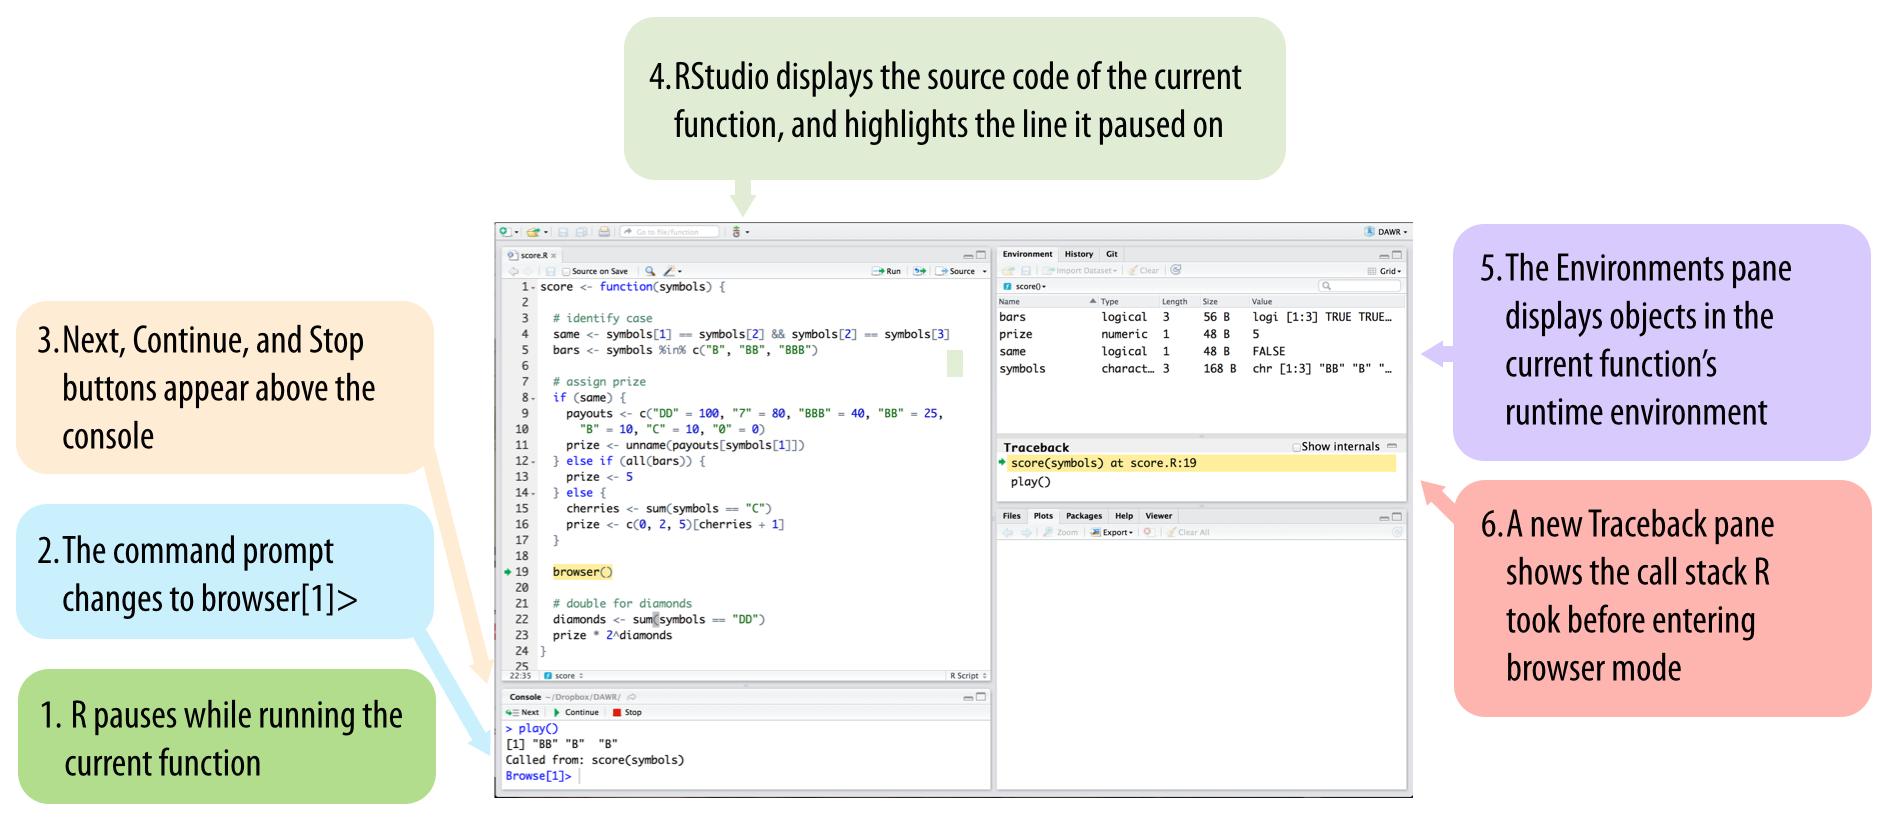 RStudio updates its display whenever you enter browser mode to help you navigate the mode.